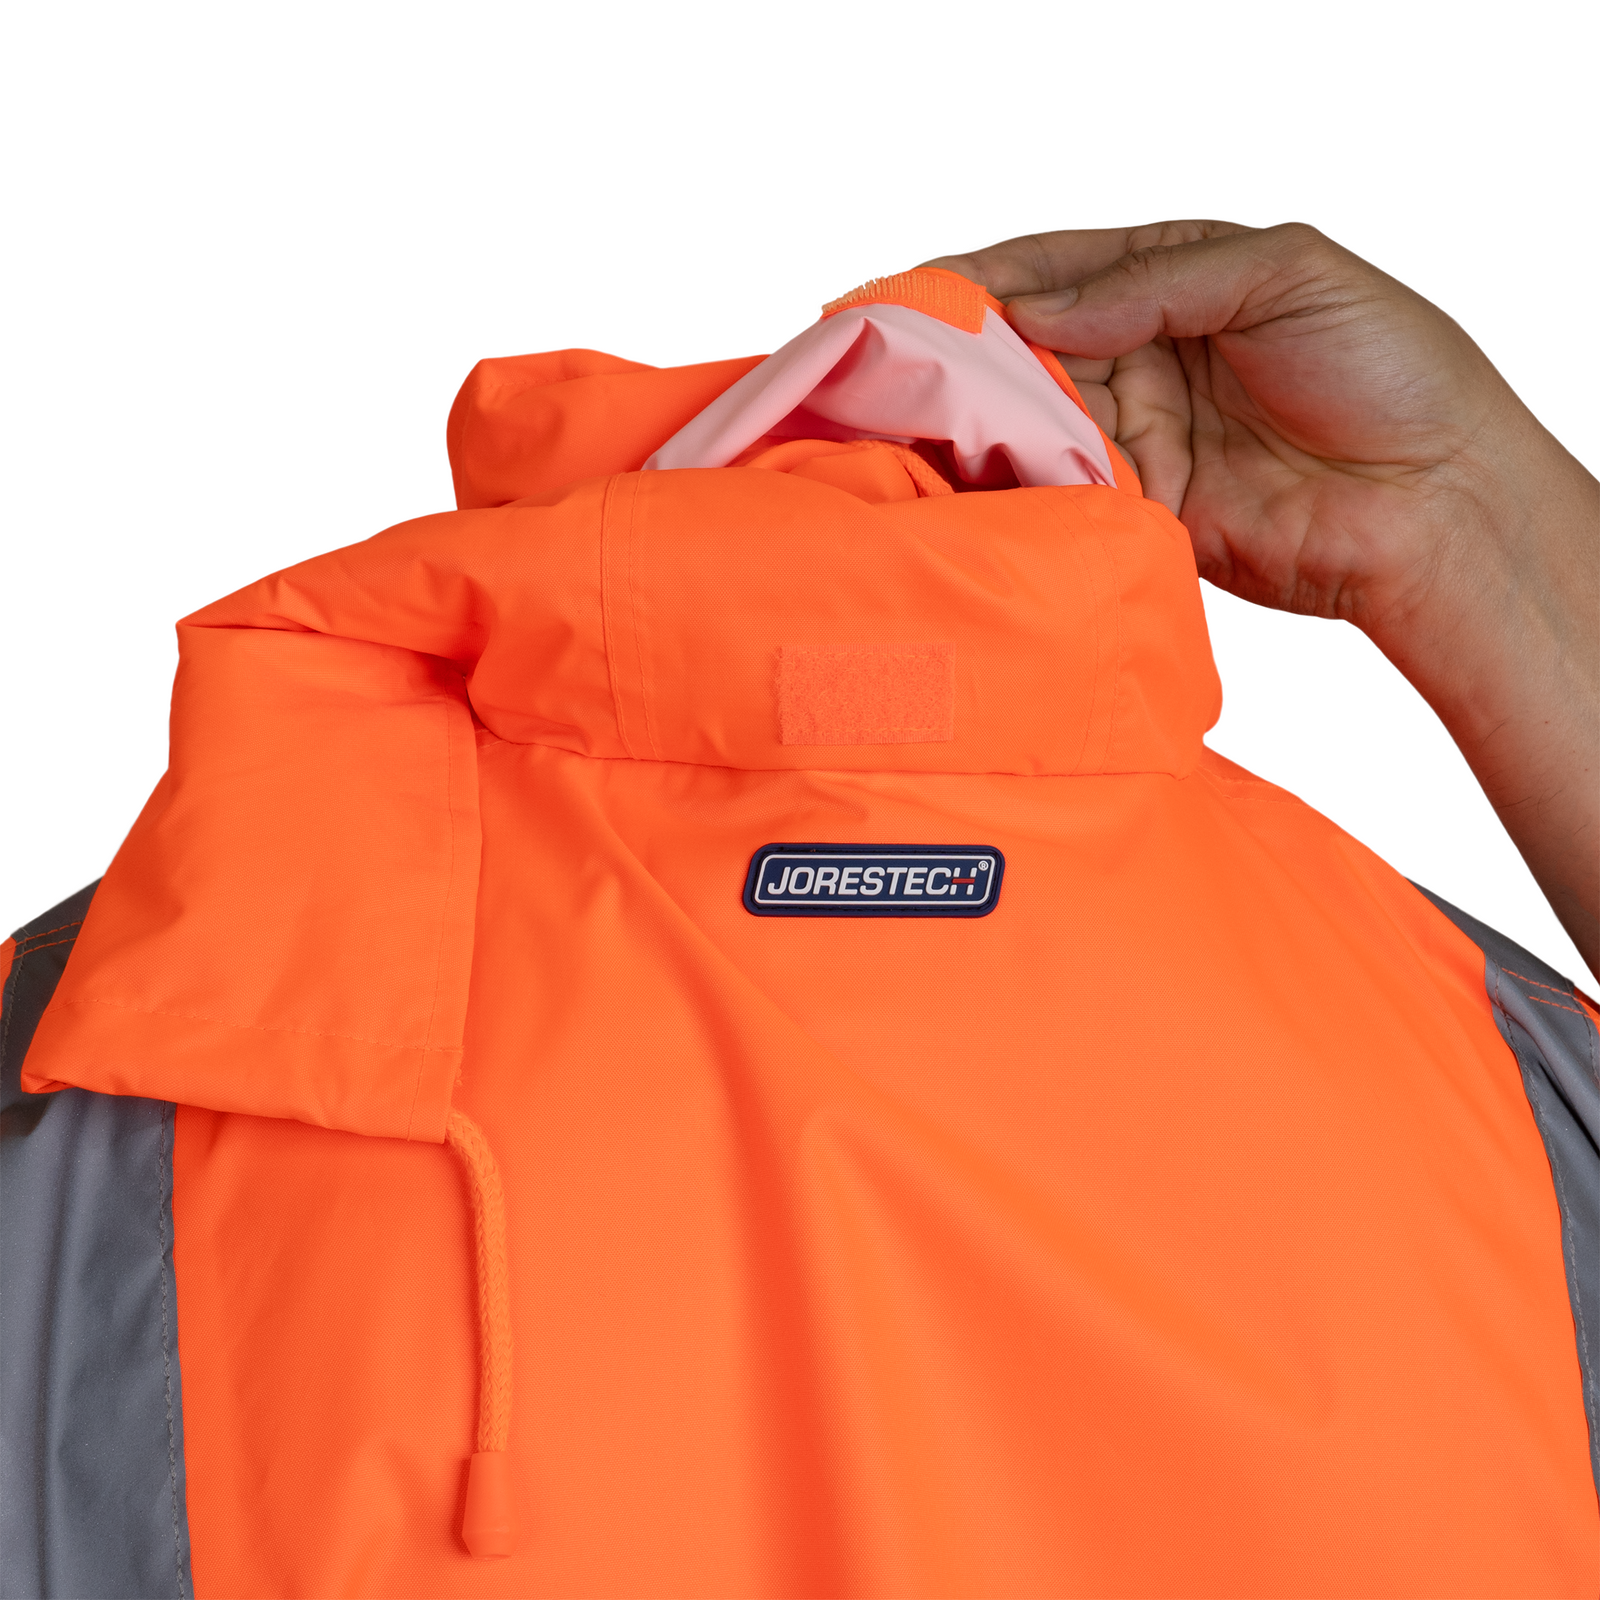 High visibility orange and black rain jacket with hideaway hoodie and 2 inches reflective stripes